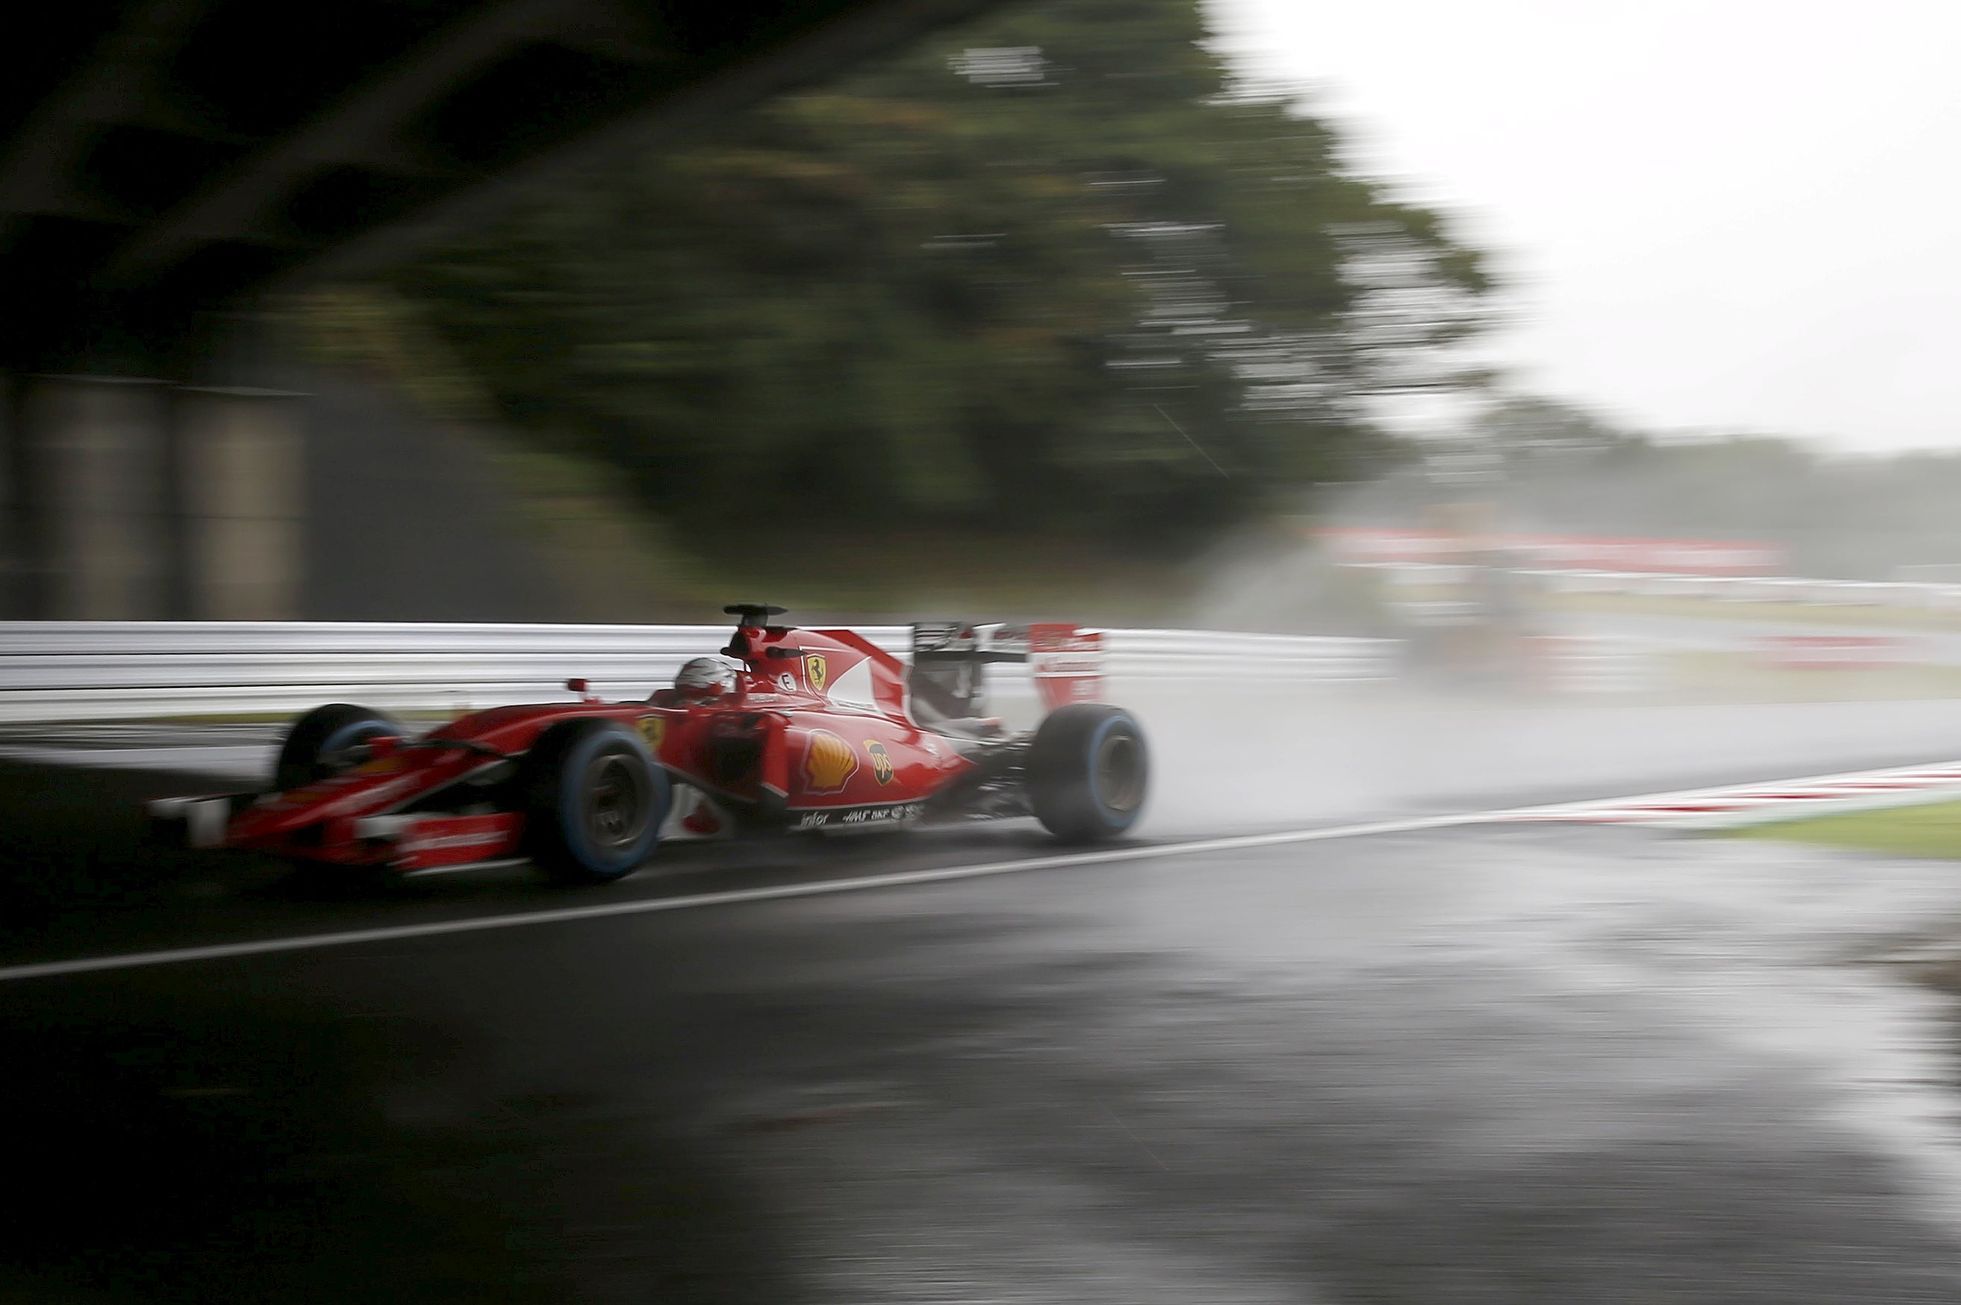 Ferrari Formula One driver Vettel of Germany drives during the second practice session in Suzuka